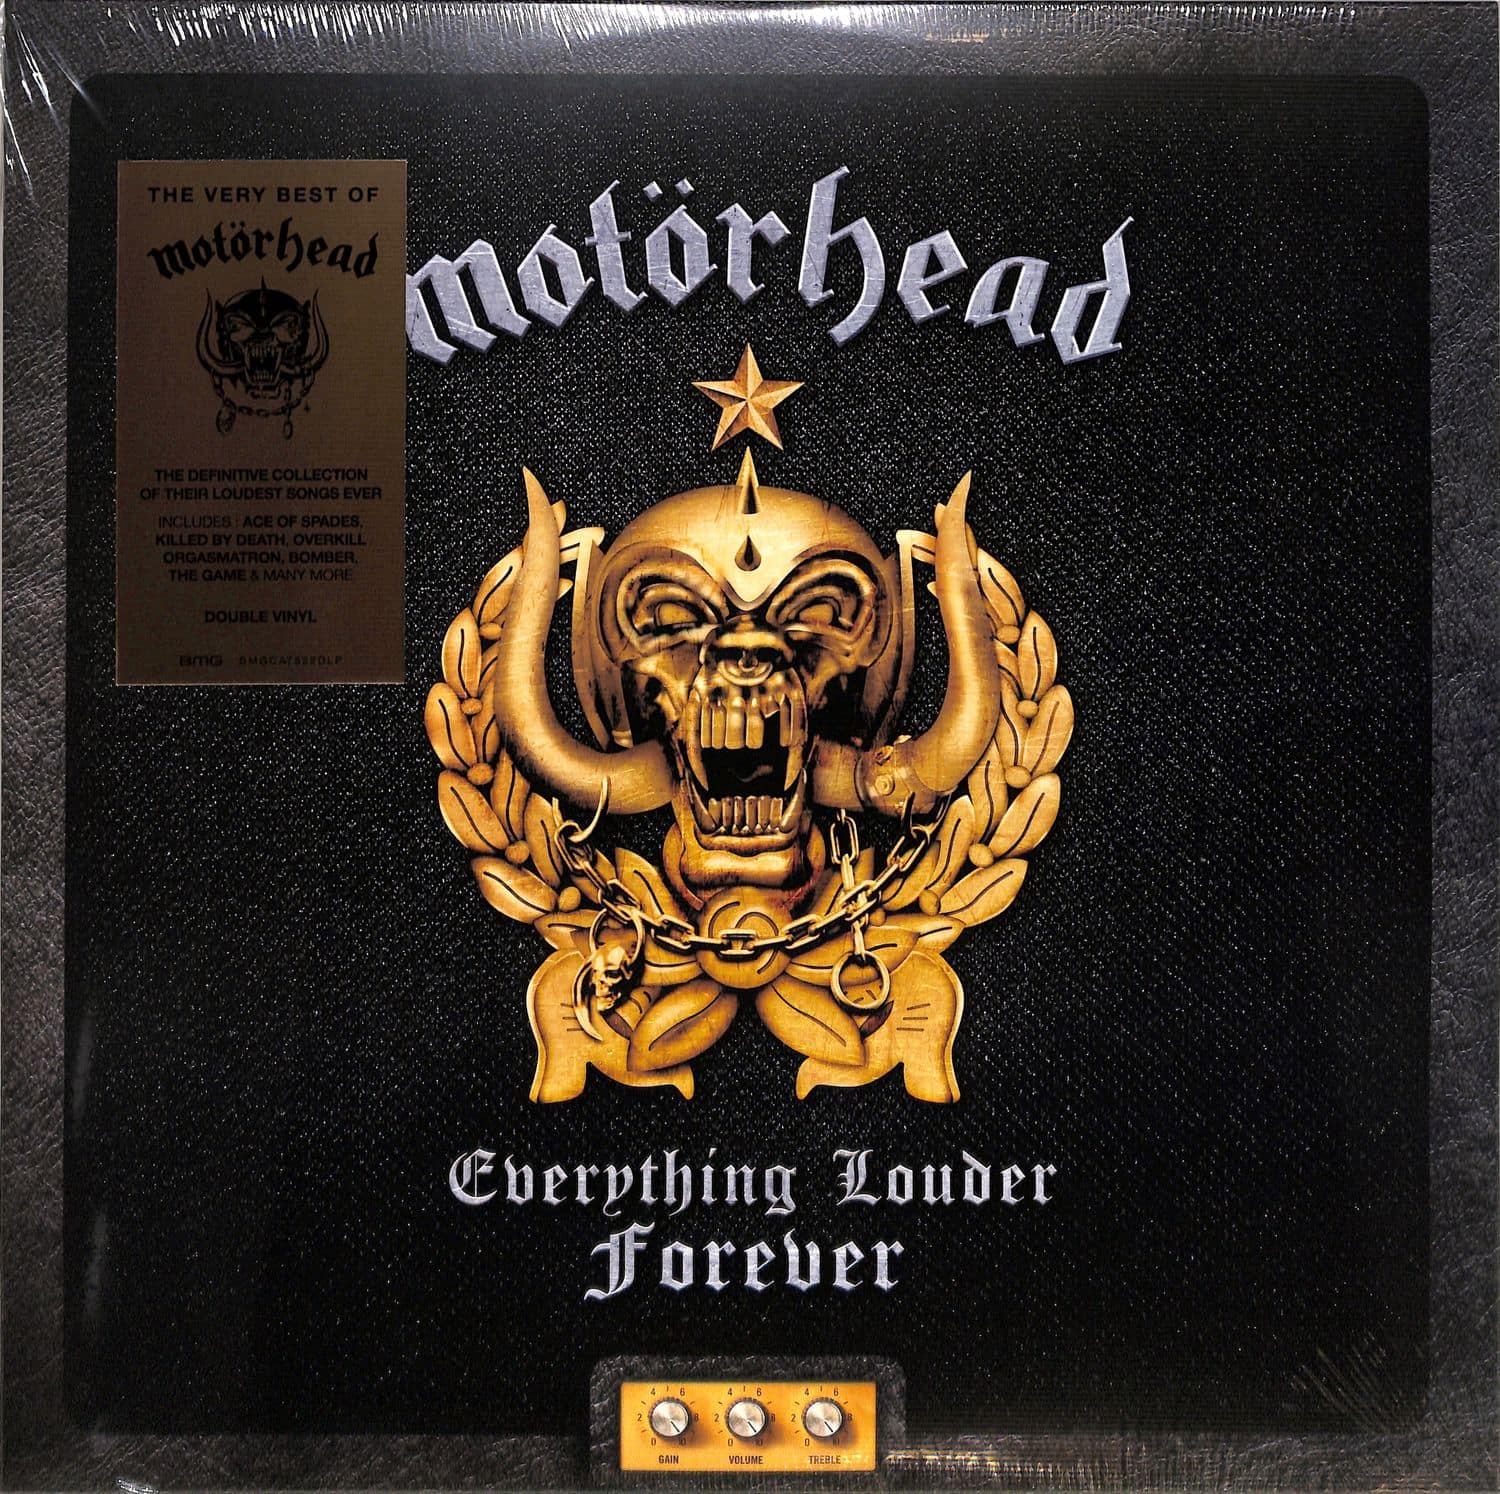 Motrhead - EVERYTHING LOUDER FOREVER - THE VERY BEST OF 